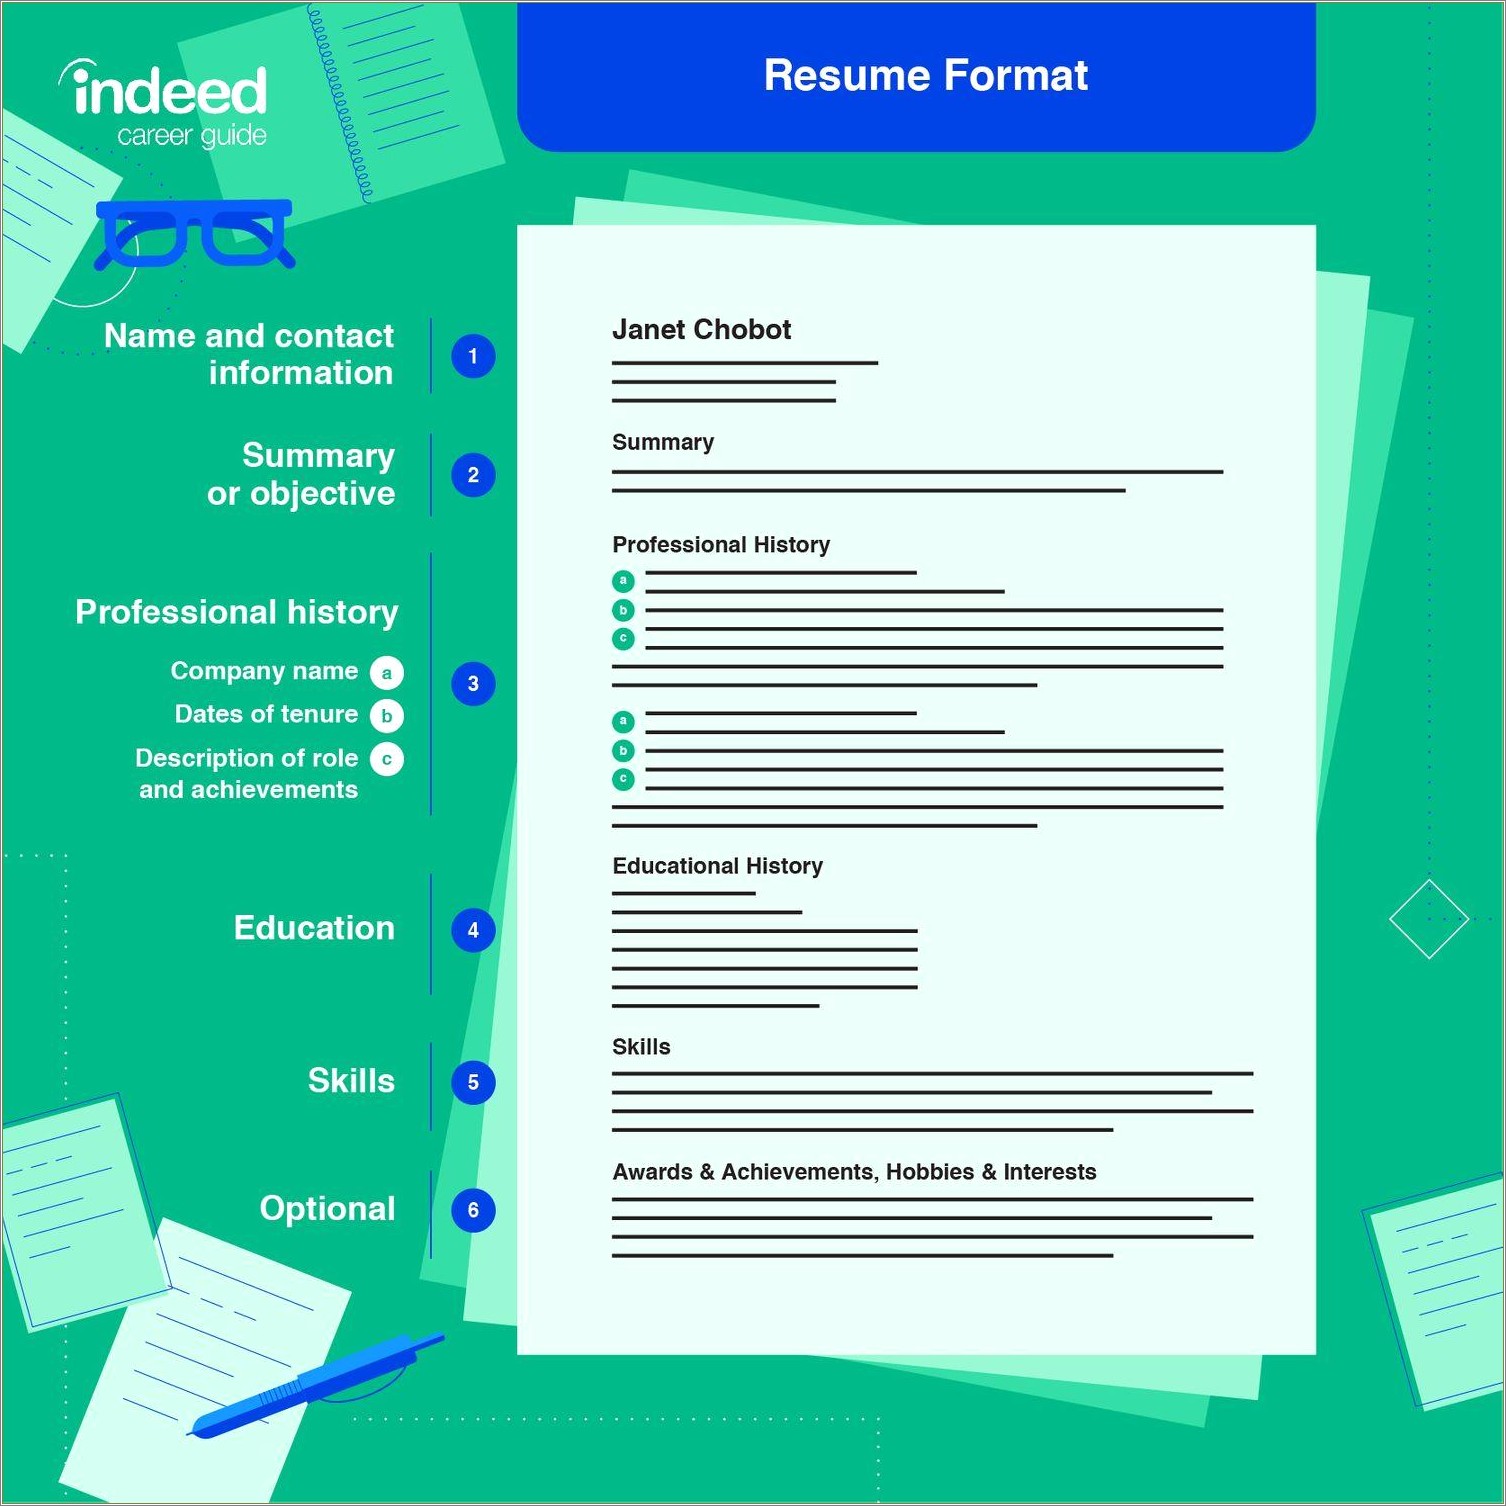 Example 5 Top Skills For Resume